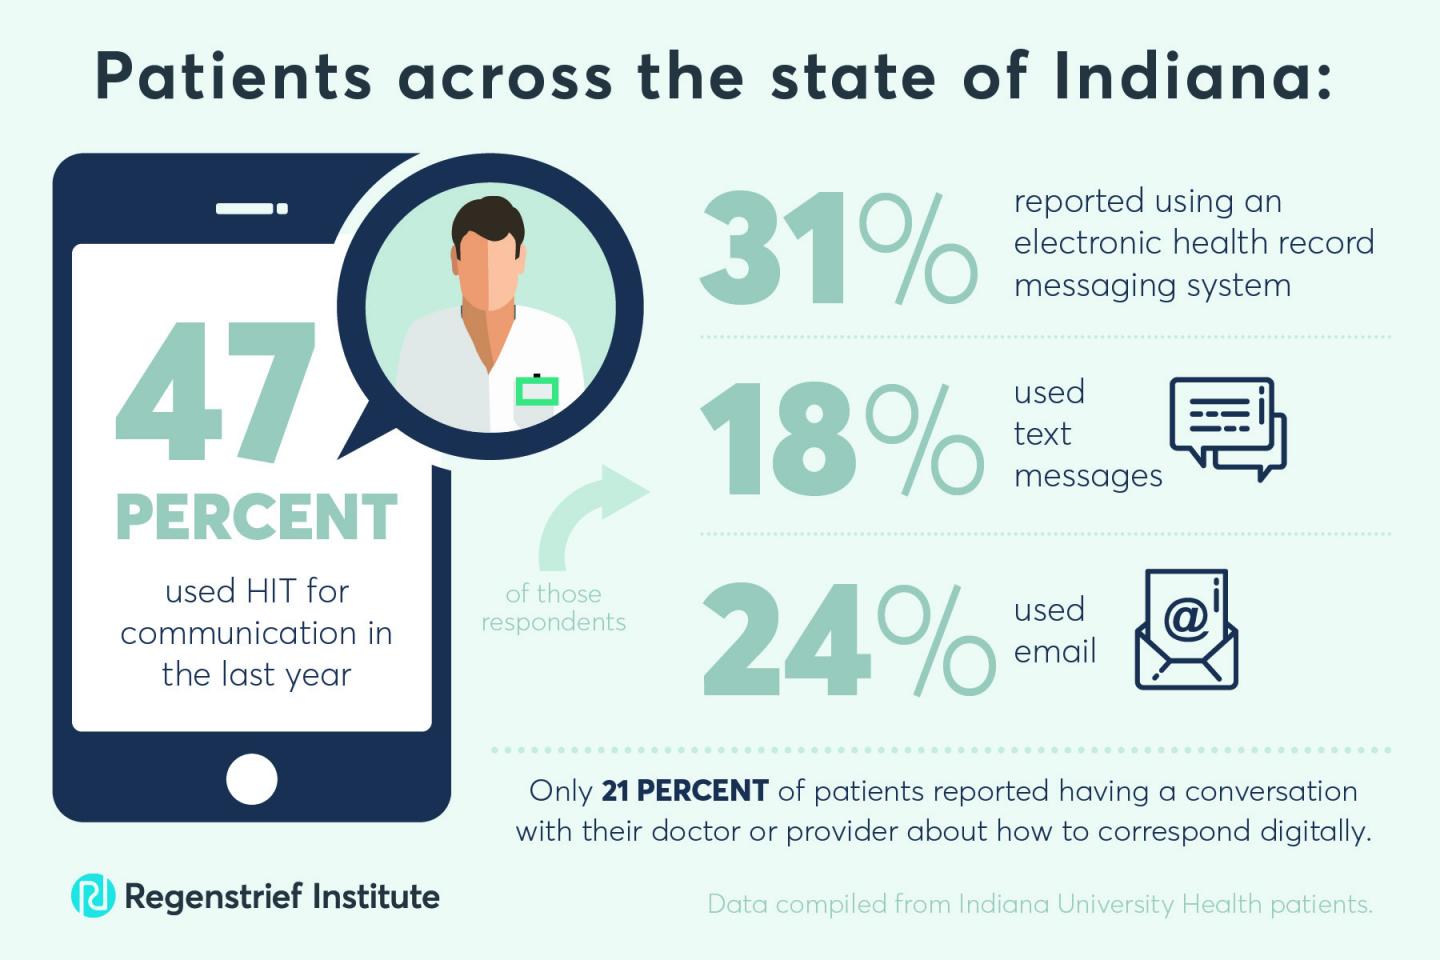 About half of people use health technology to communicate with their health providers